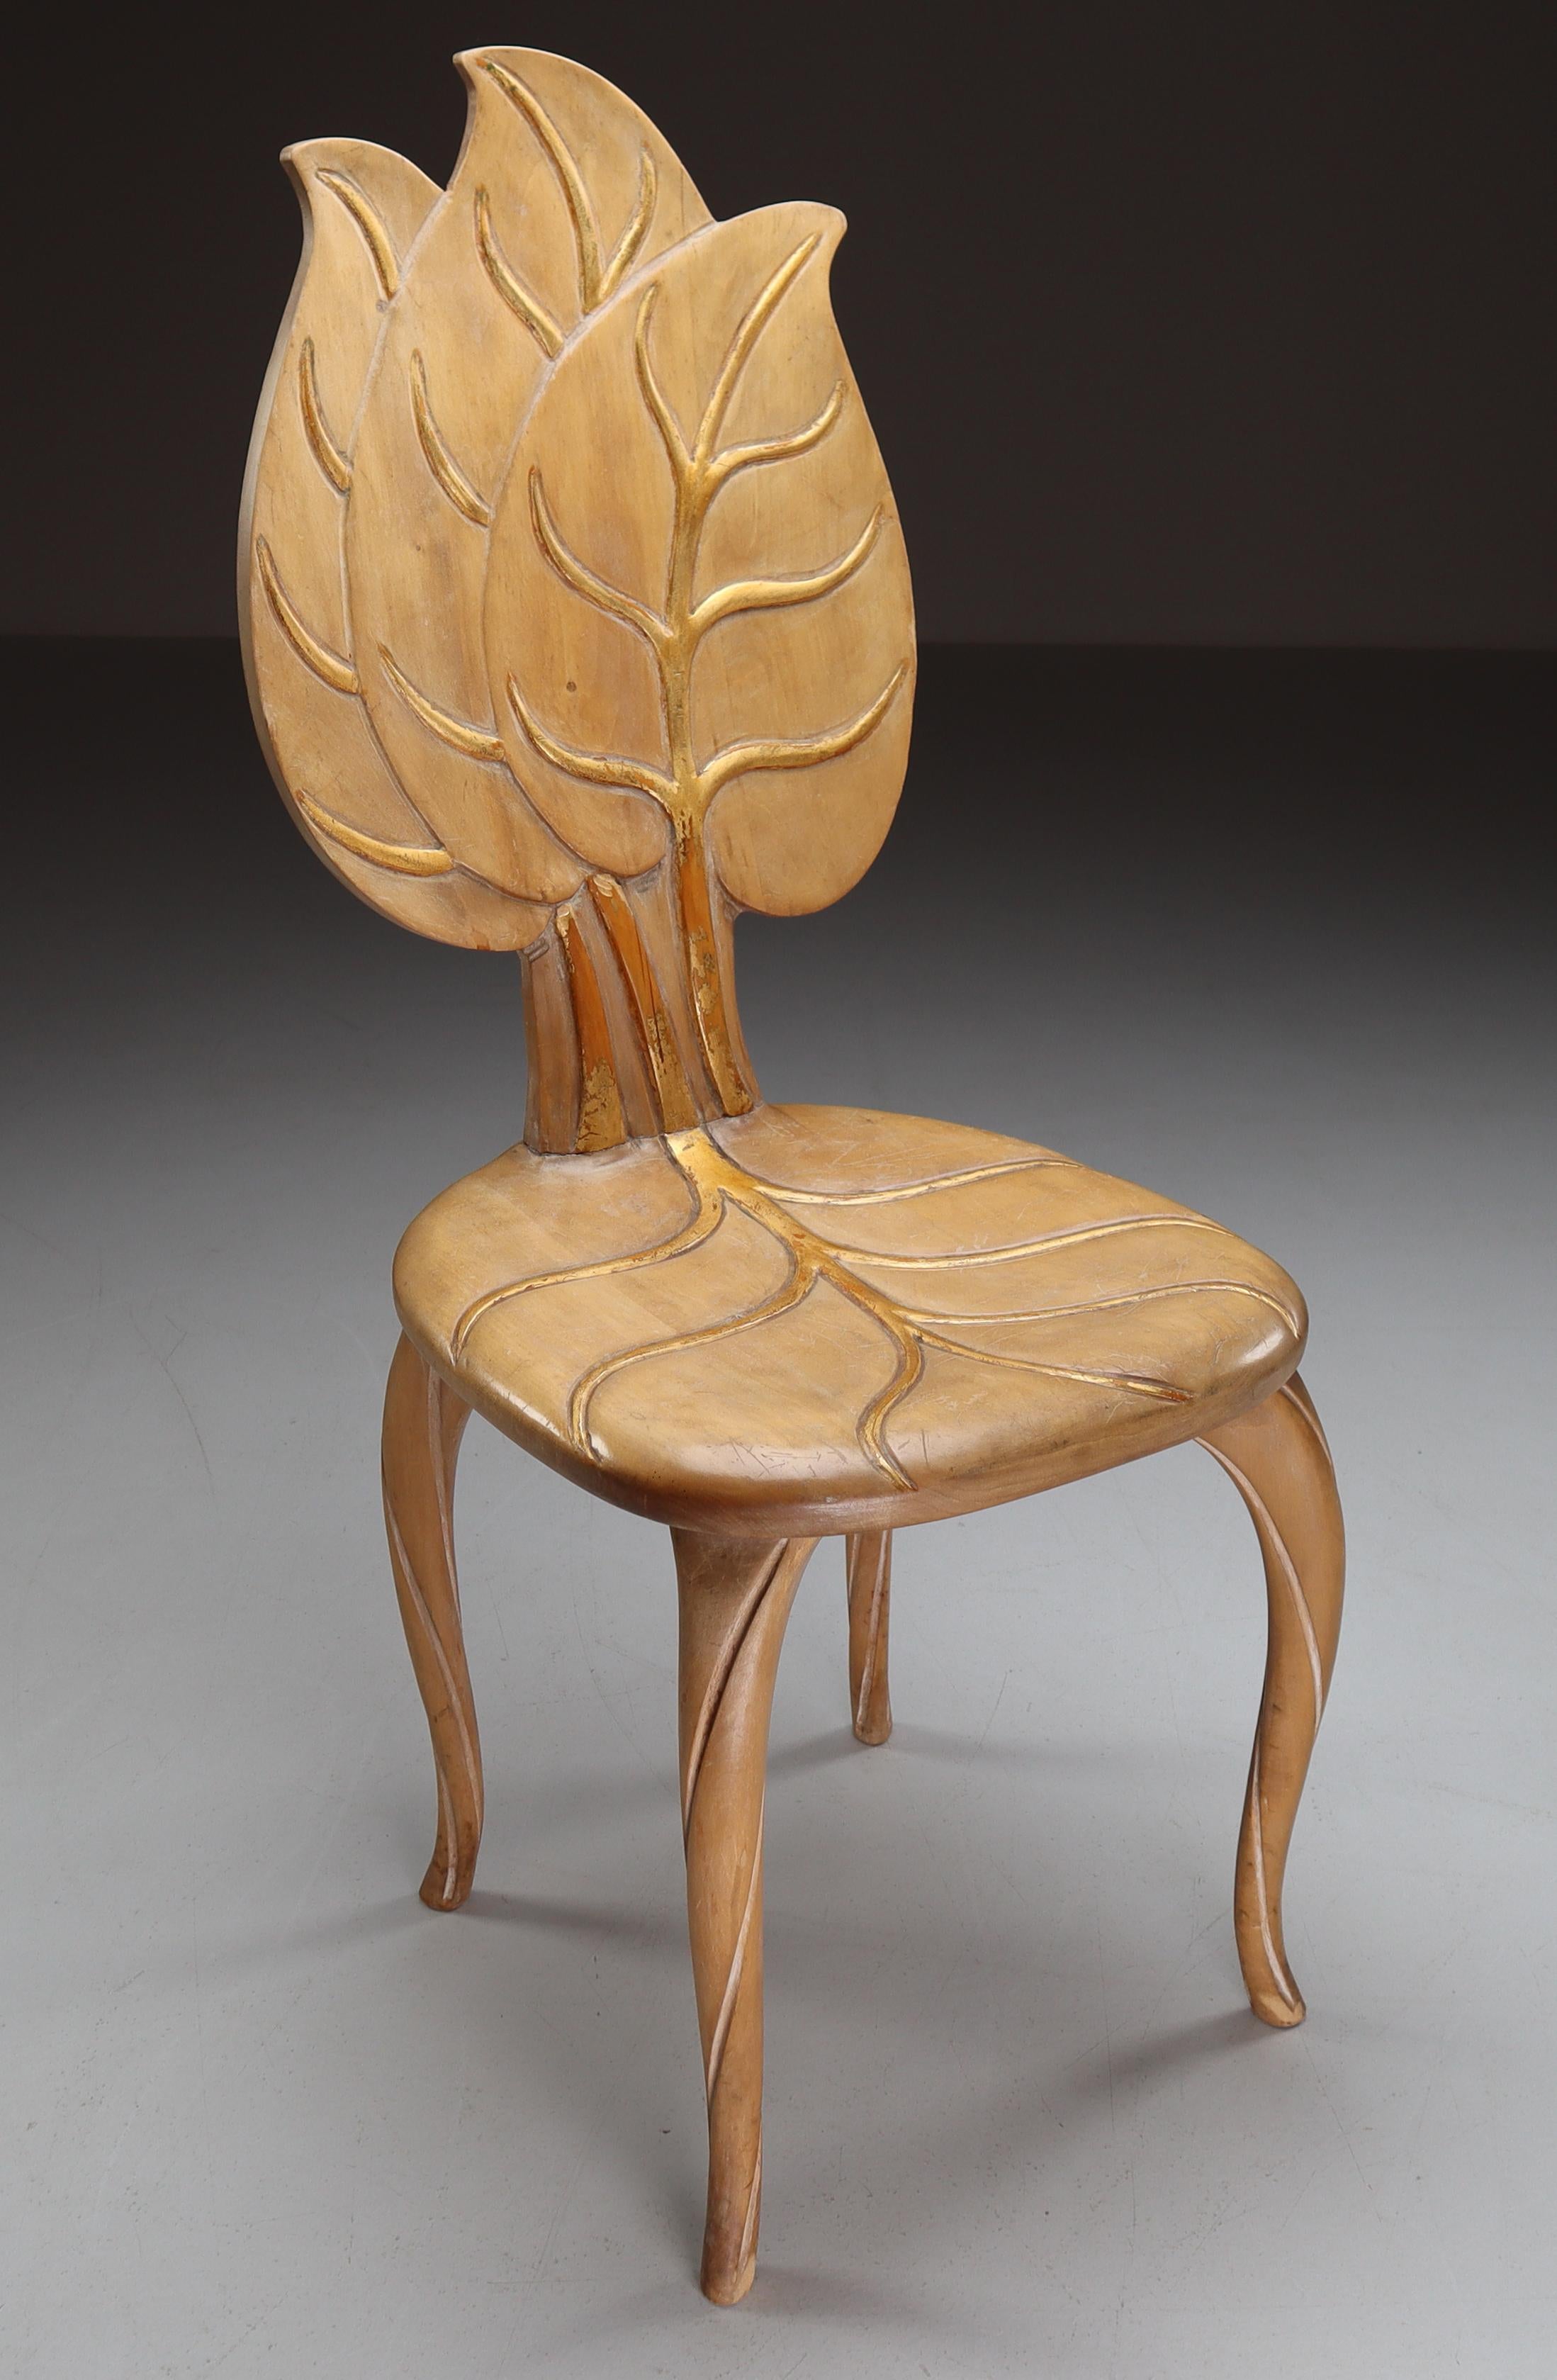 Bartolozzi & Maioli Wooden and Gold Leaf Chair, Italy, 1970s For Sale 1